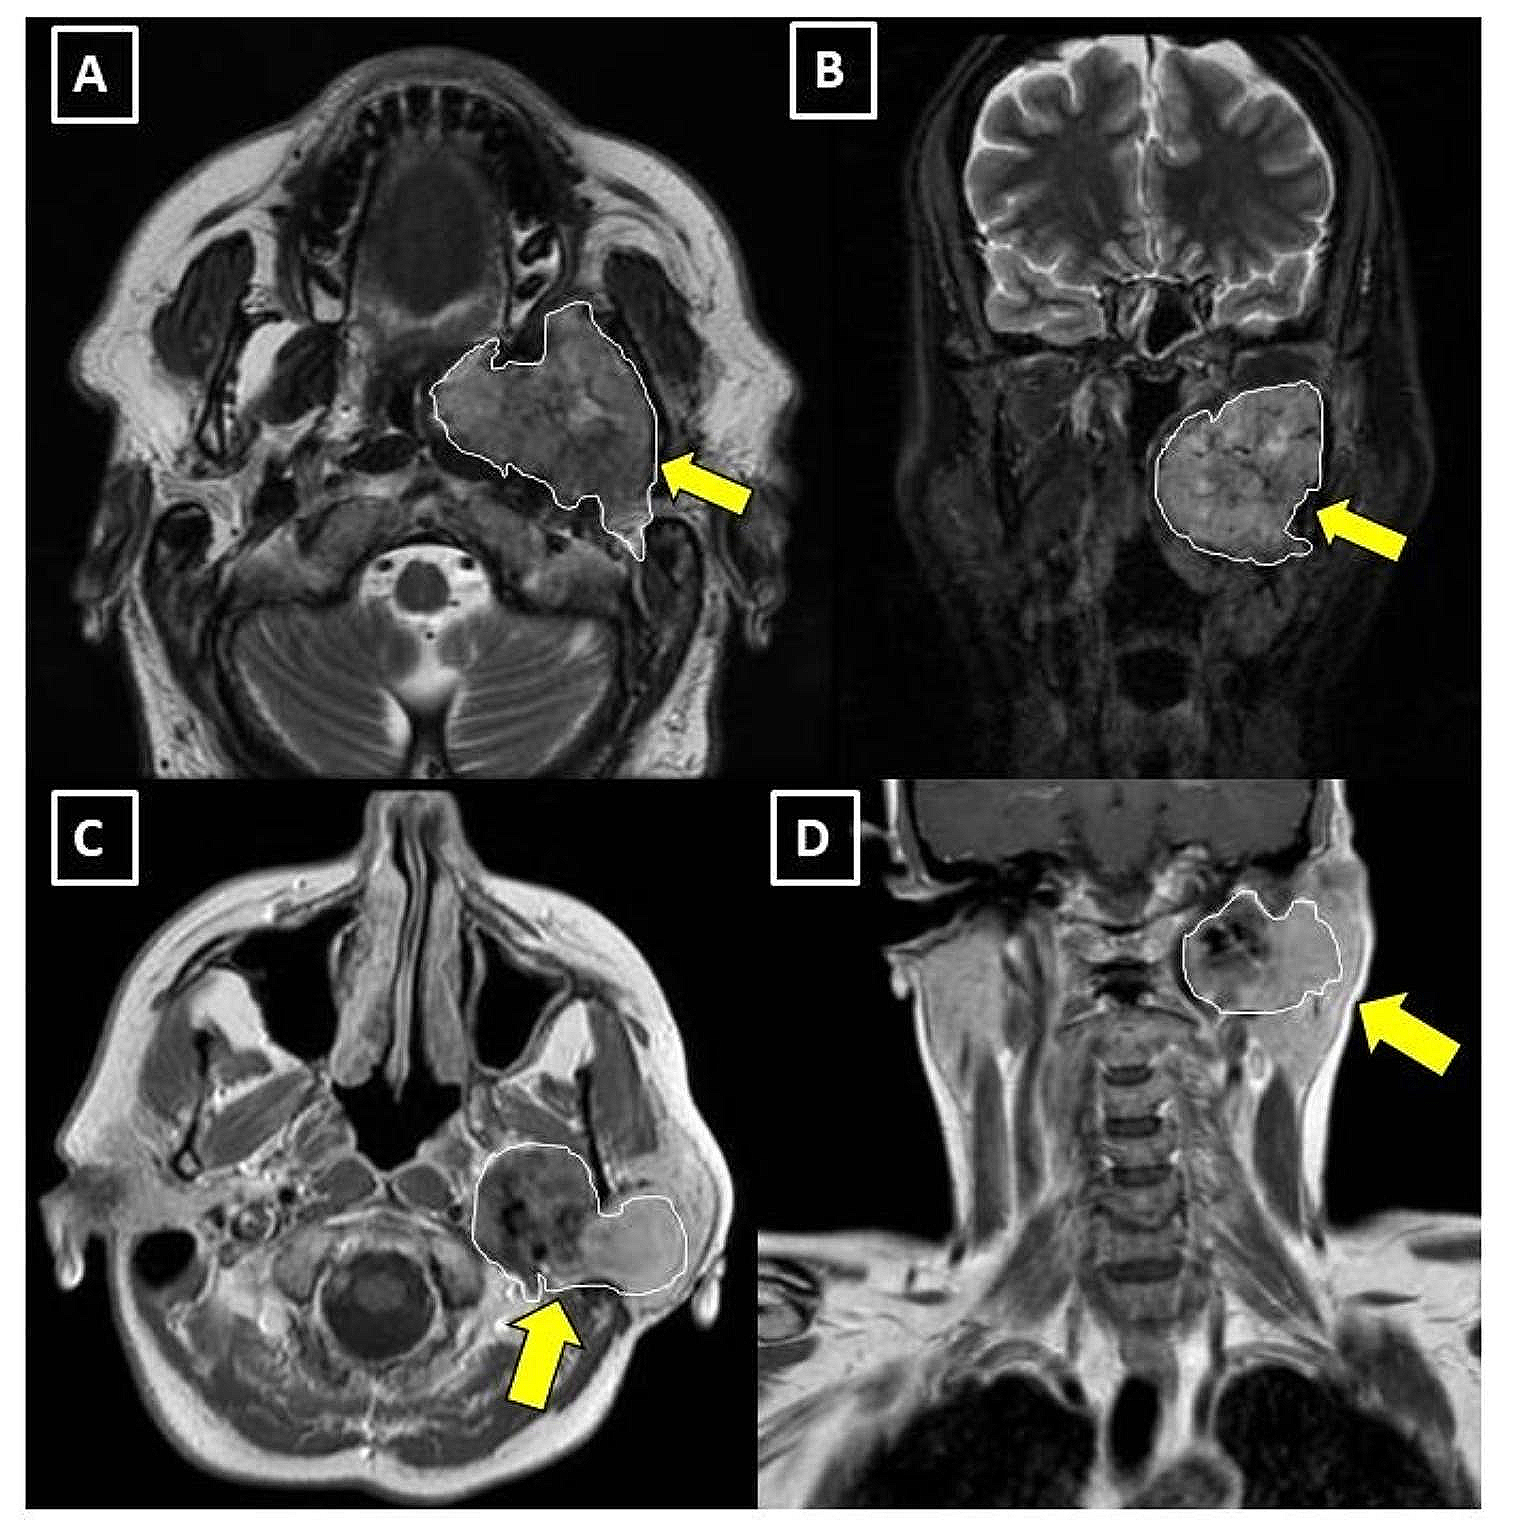 Solitary fibrous tumor of the parapharyngeal space: report of 2 cases and a literature review